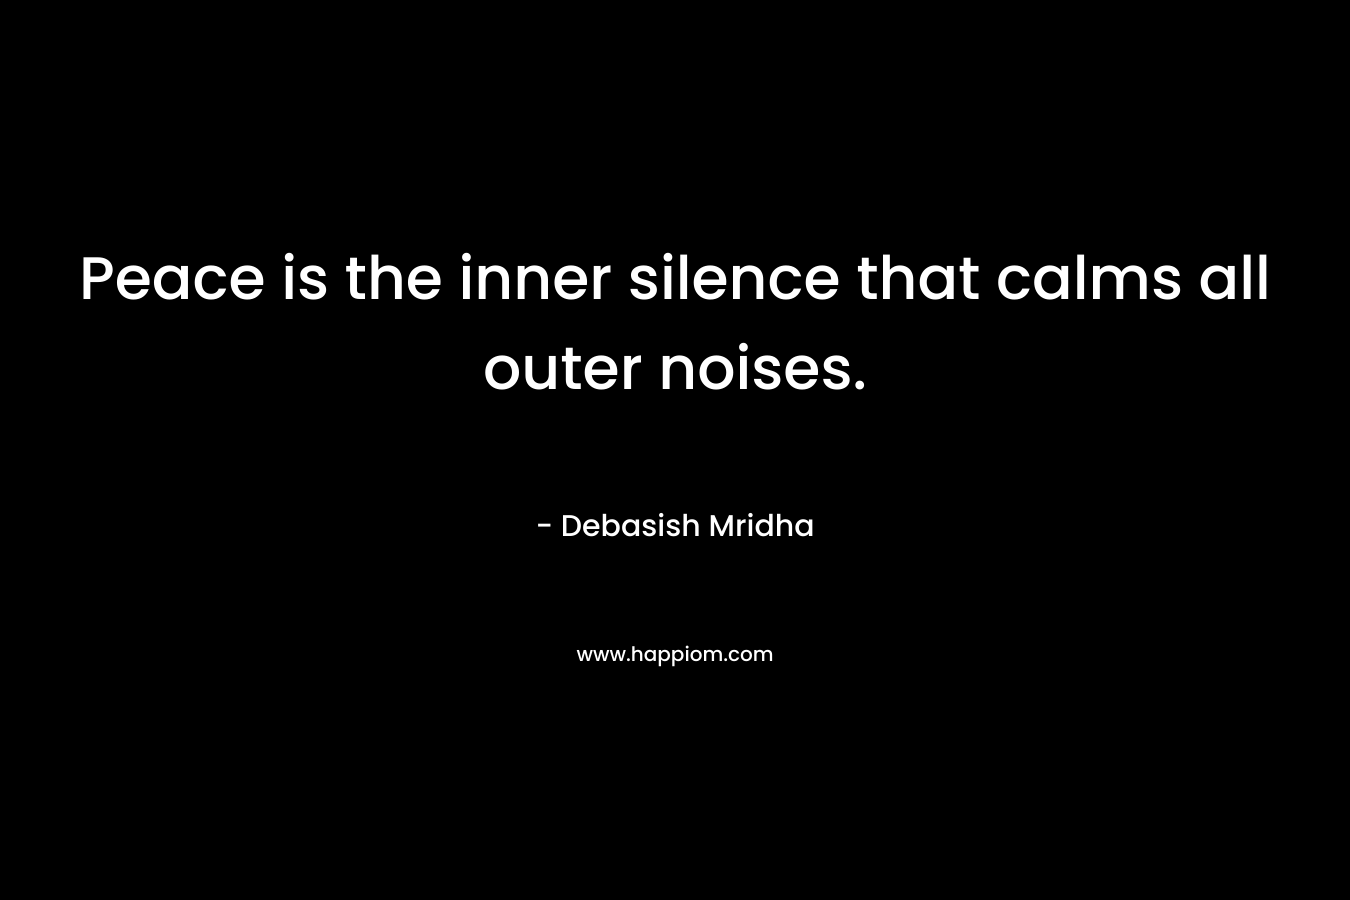 Peace is the inner silence that calms all outer noises.